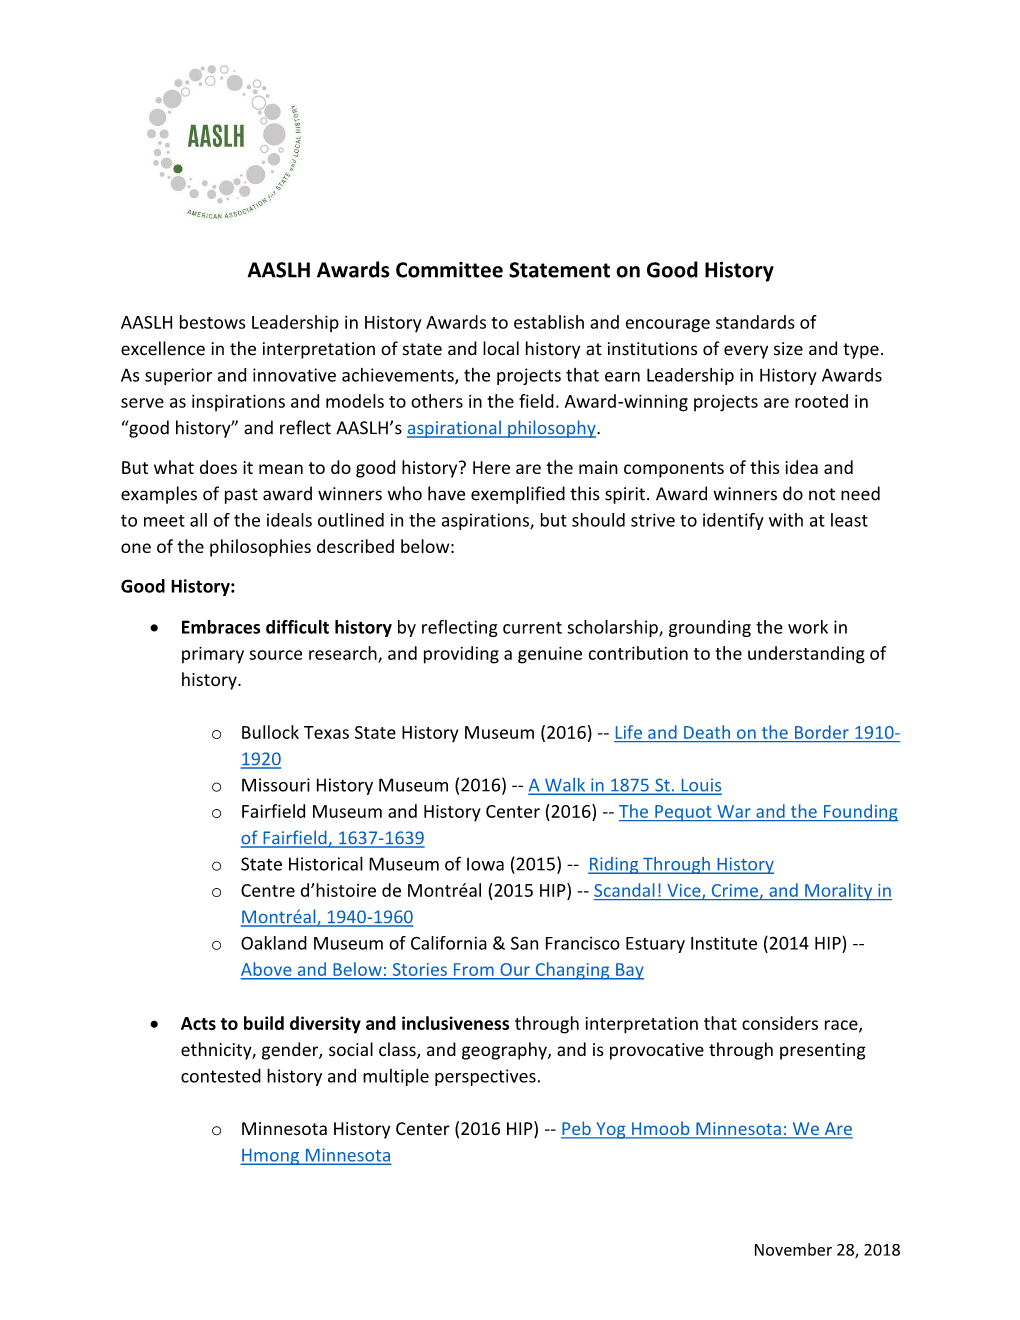 AASLH Awards Committee Statement on Good History